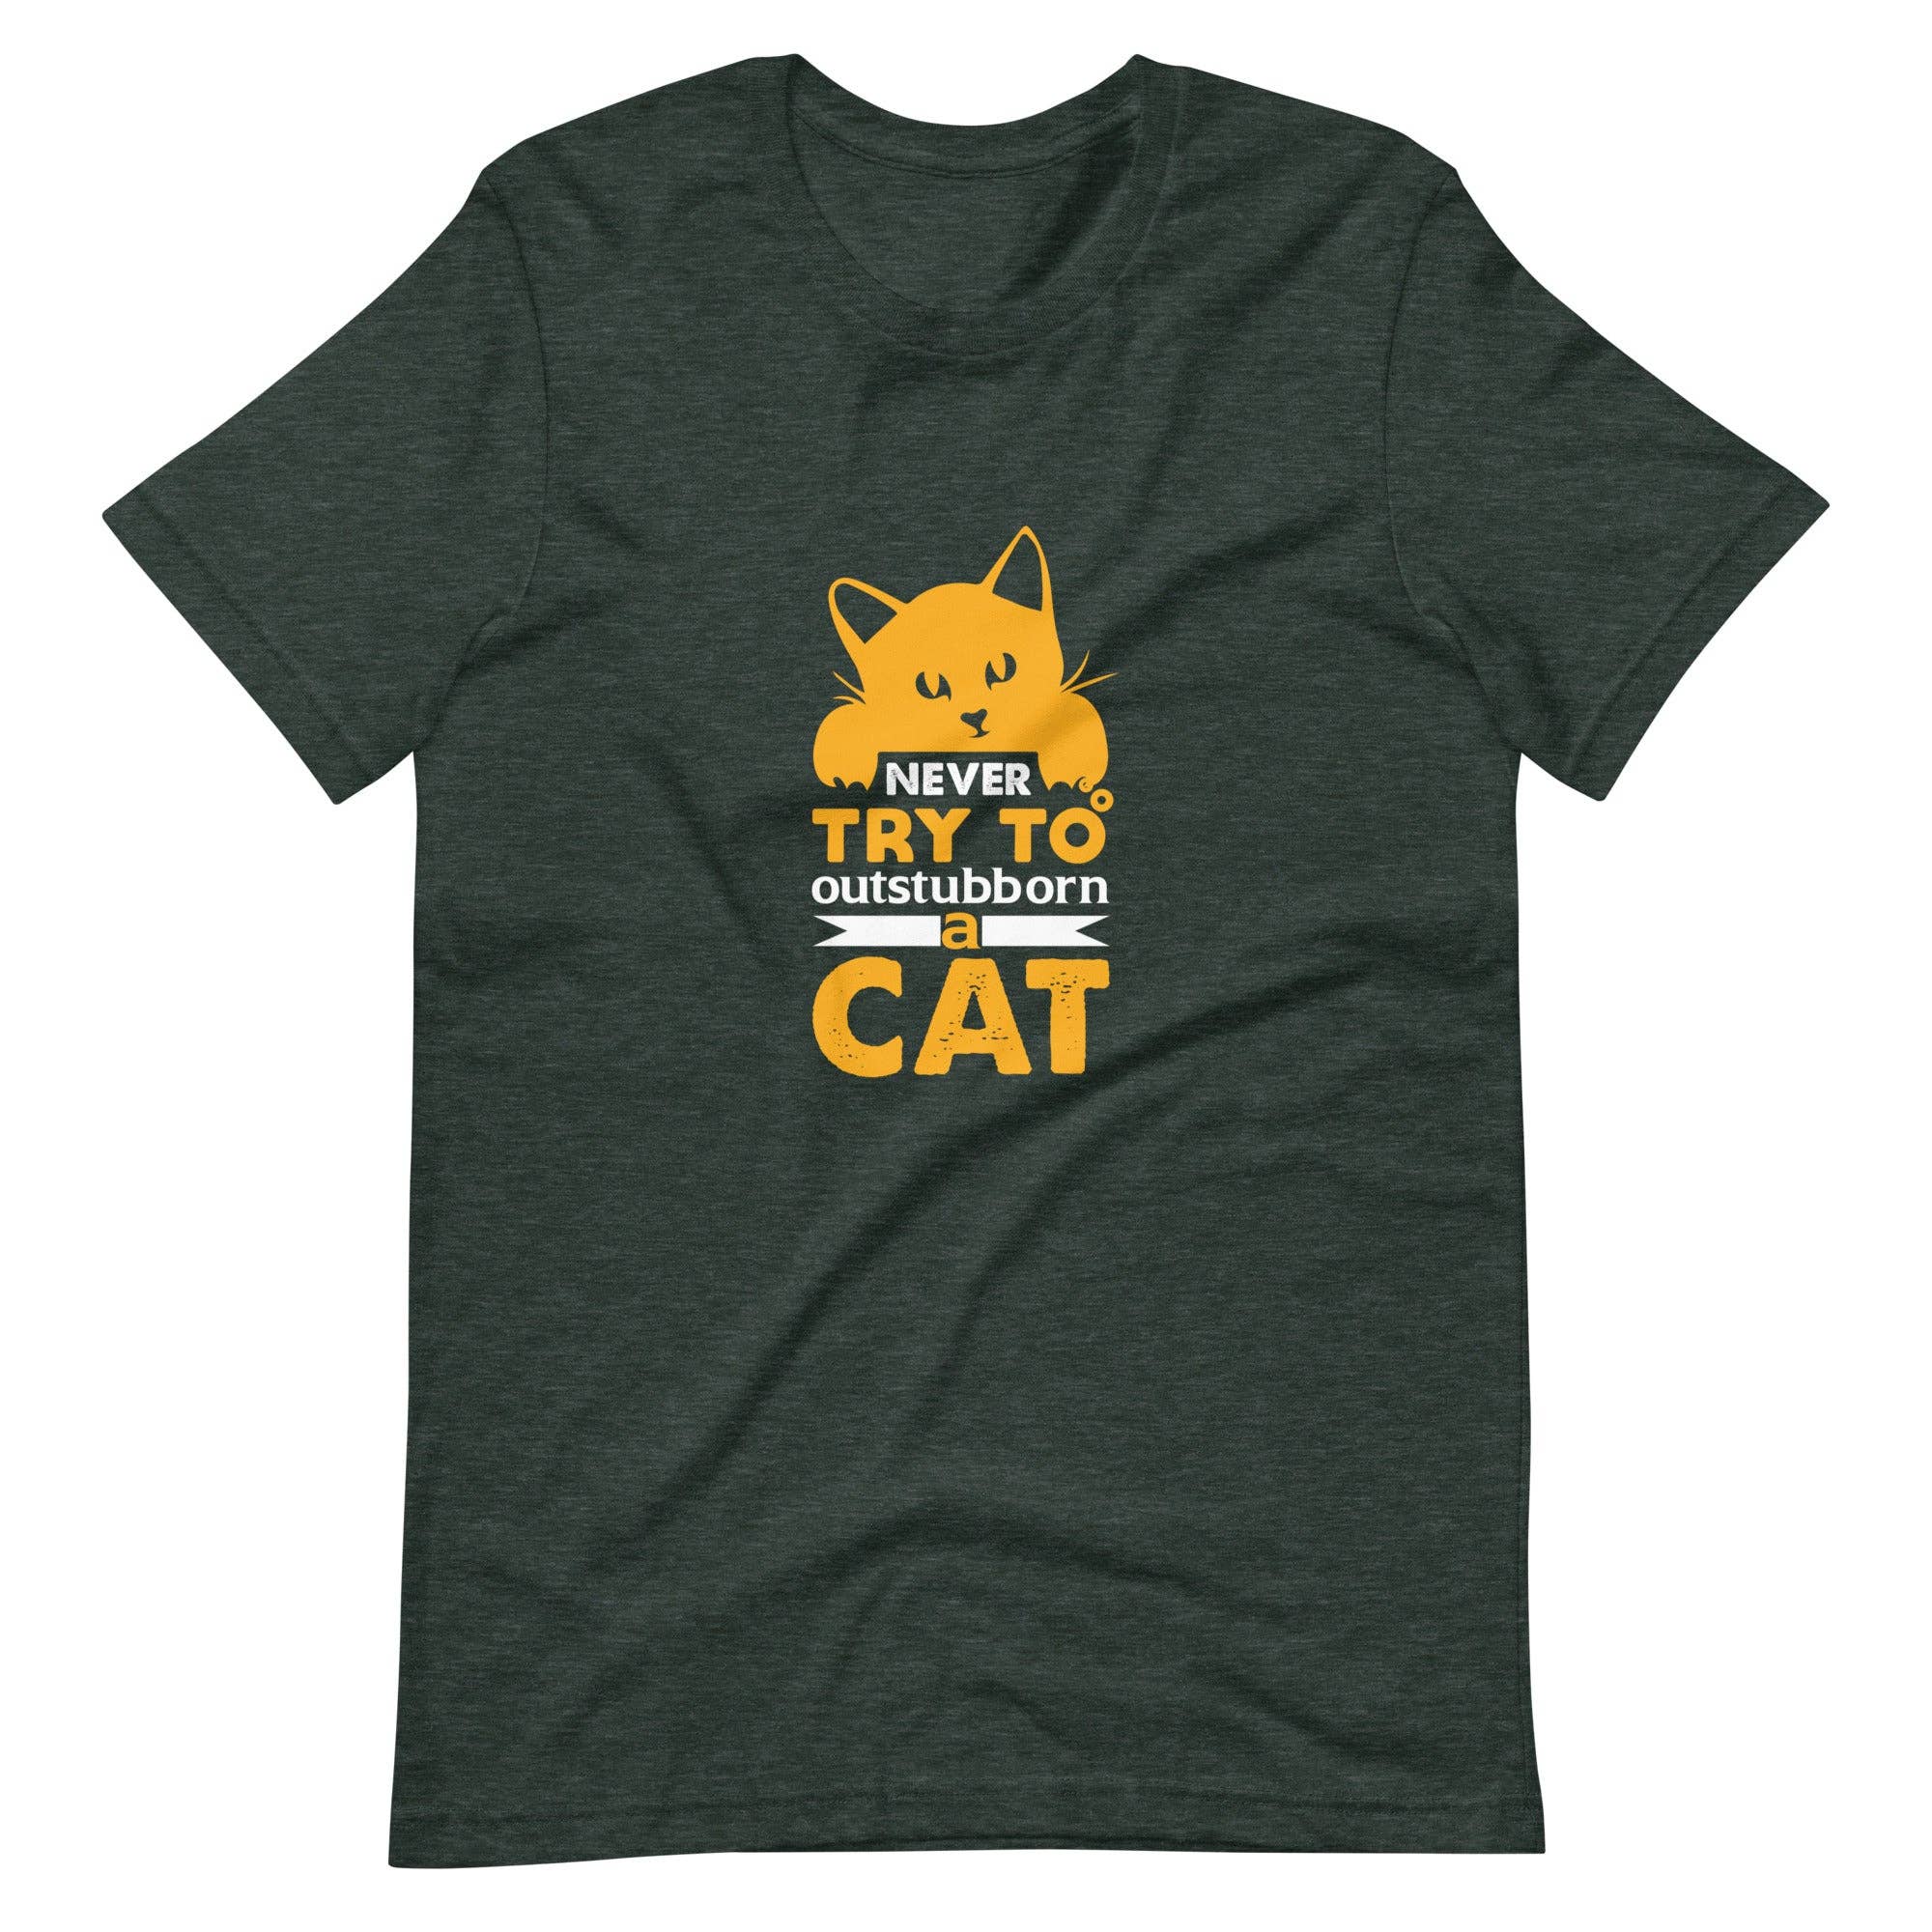 Graphic Tee - Never Outstubborn a Cat